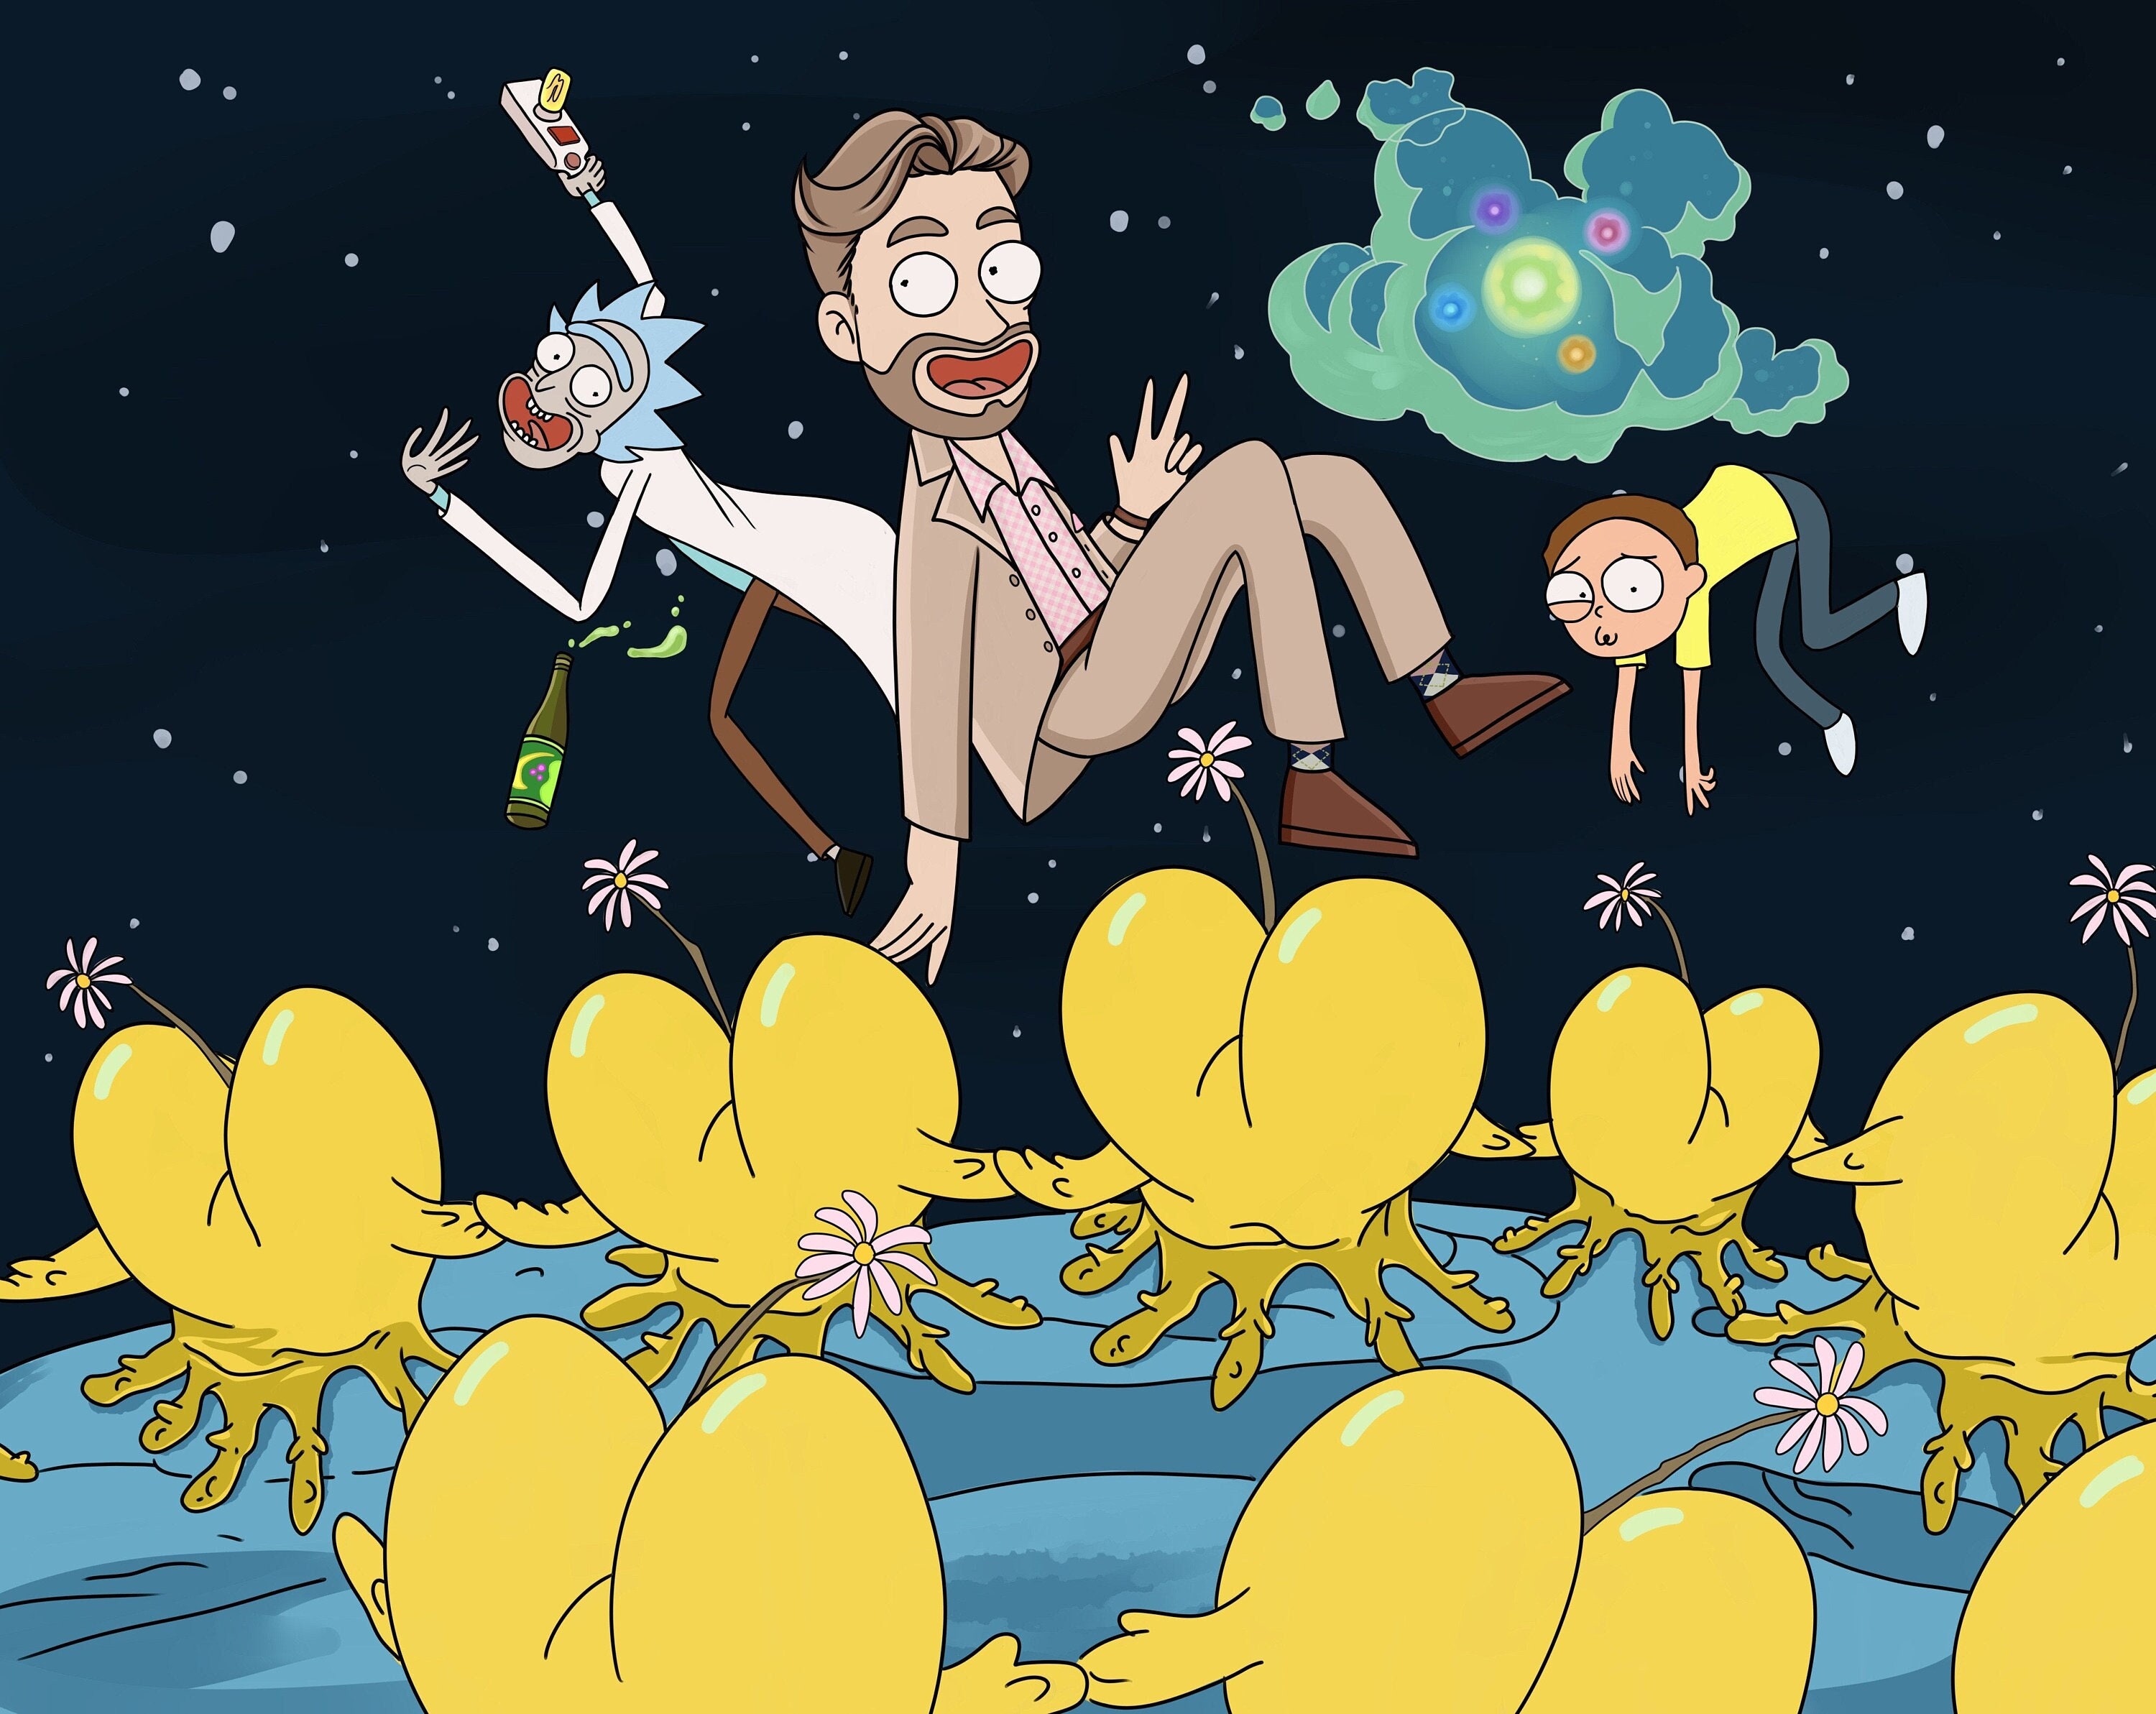 Rick And Morty Art Gifts & Merchandise for Sale